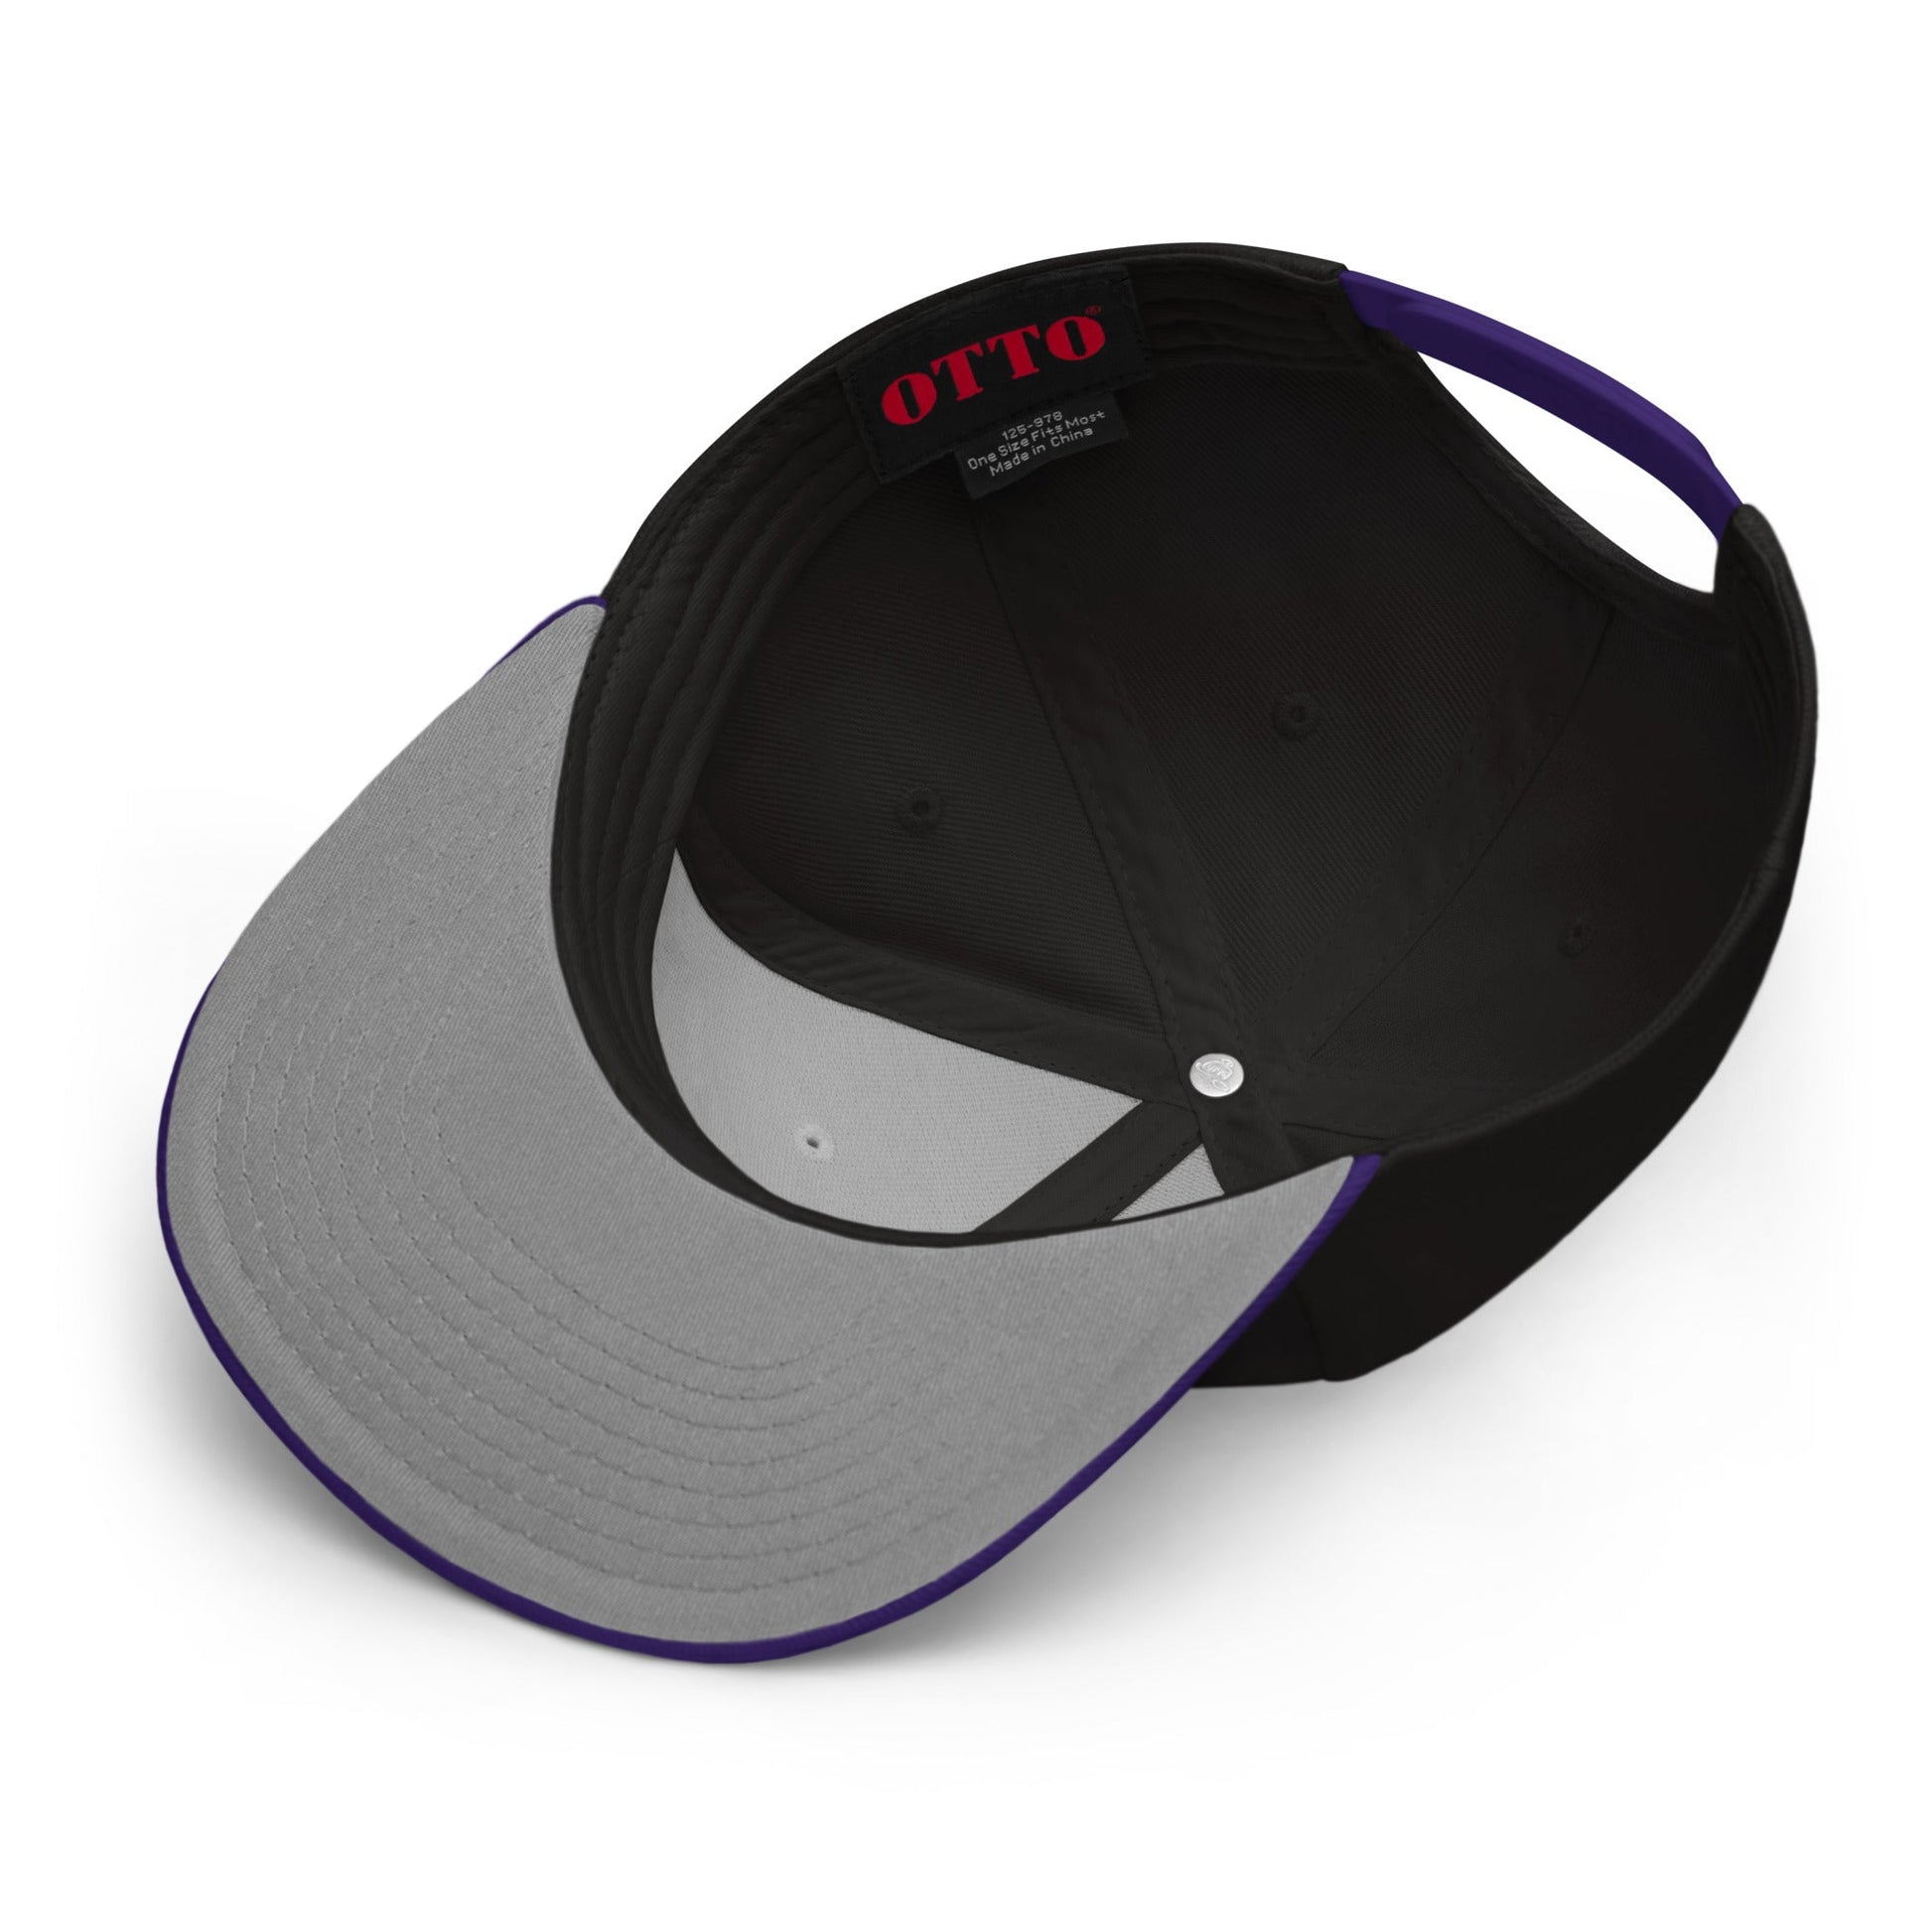 Draft Label Snapback Hat - BeExtra! Apparel & More